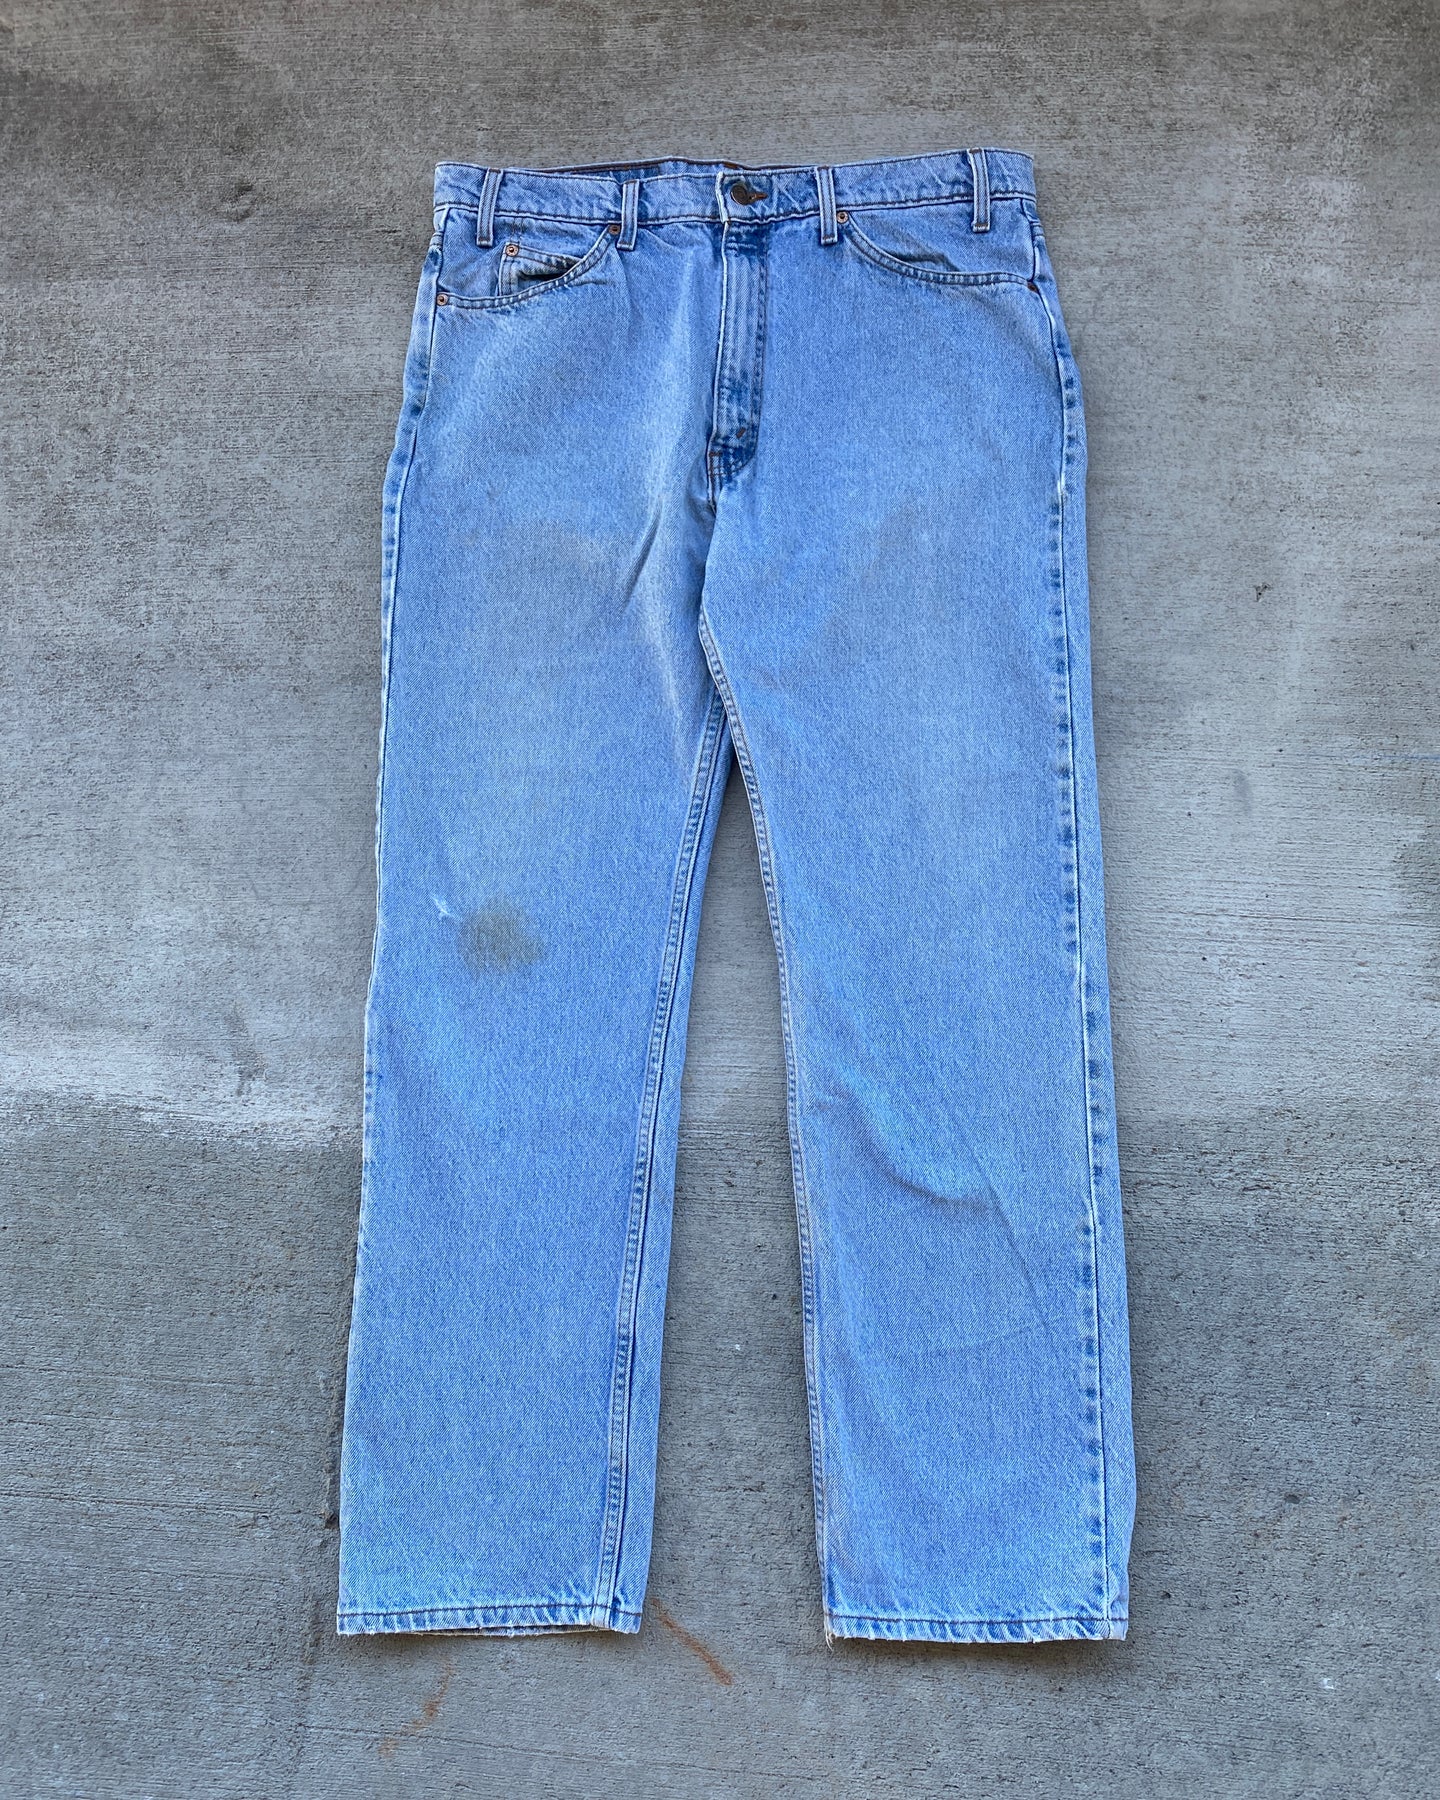 1990s Levi's 505 Orange Tab with Removed Pocket - Size 38 x 32